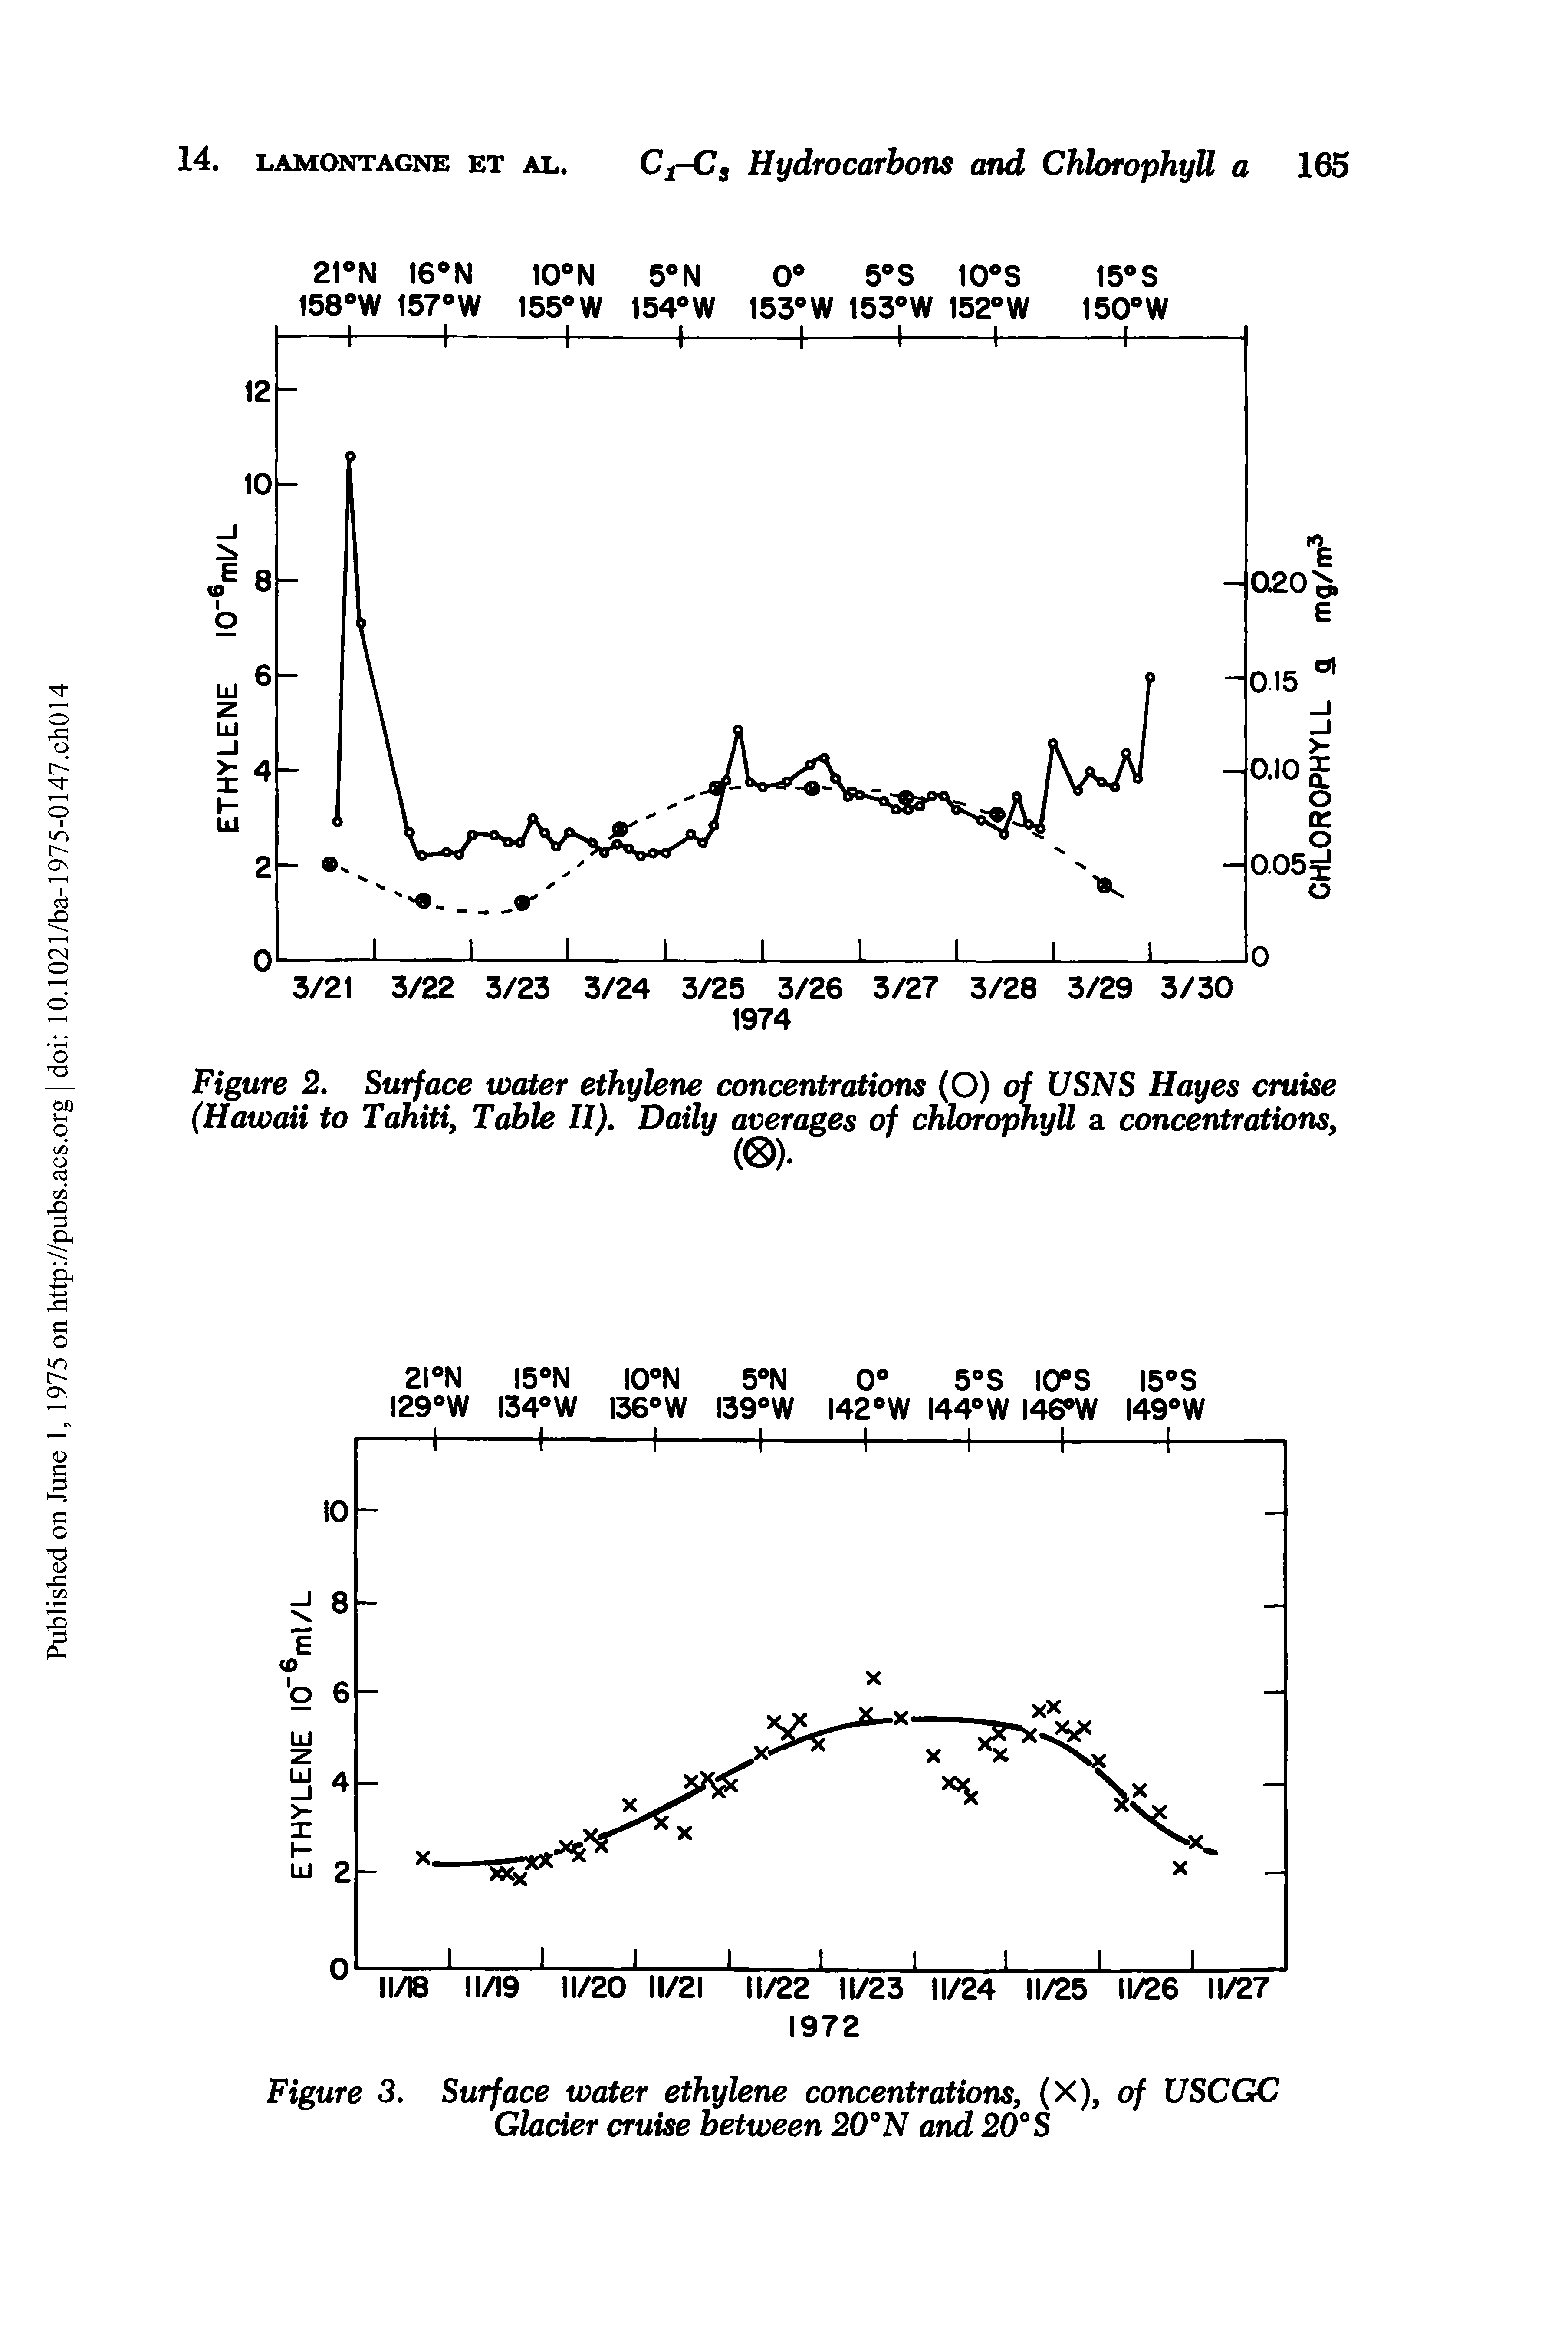 Figure 2. Surface water ethylene concentrations (O) of USNS Hayes cruise (Hawaii to Tahiti, Table II). Daily averages of chlorophyll a concentrations,...